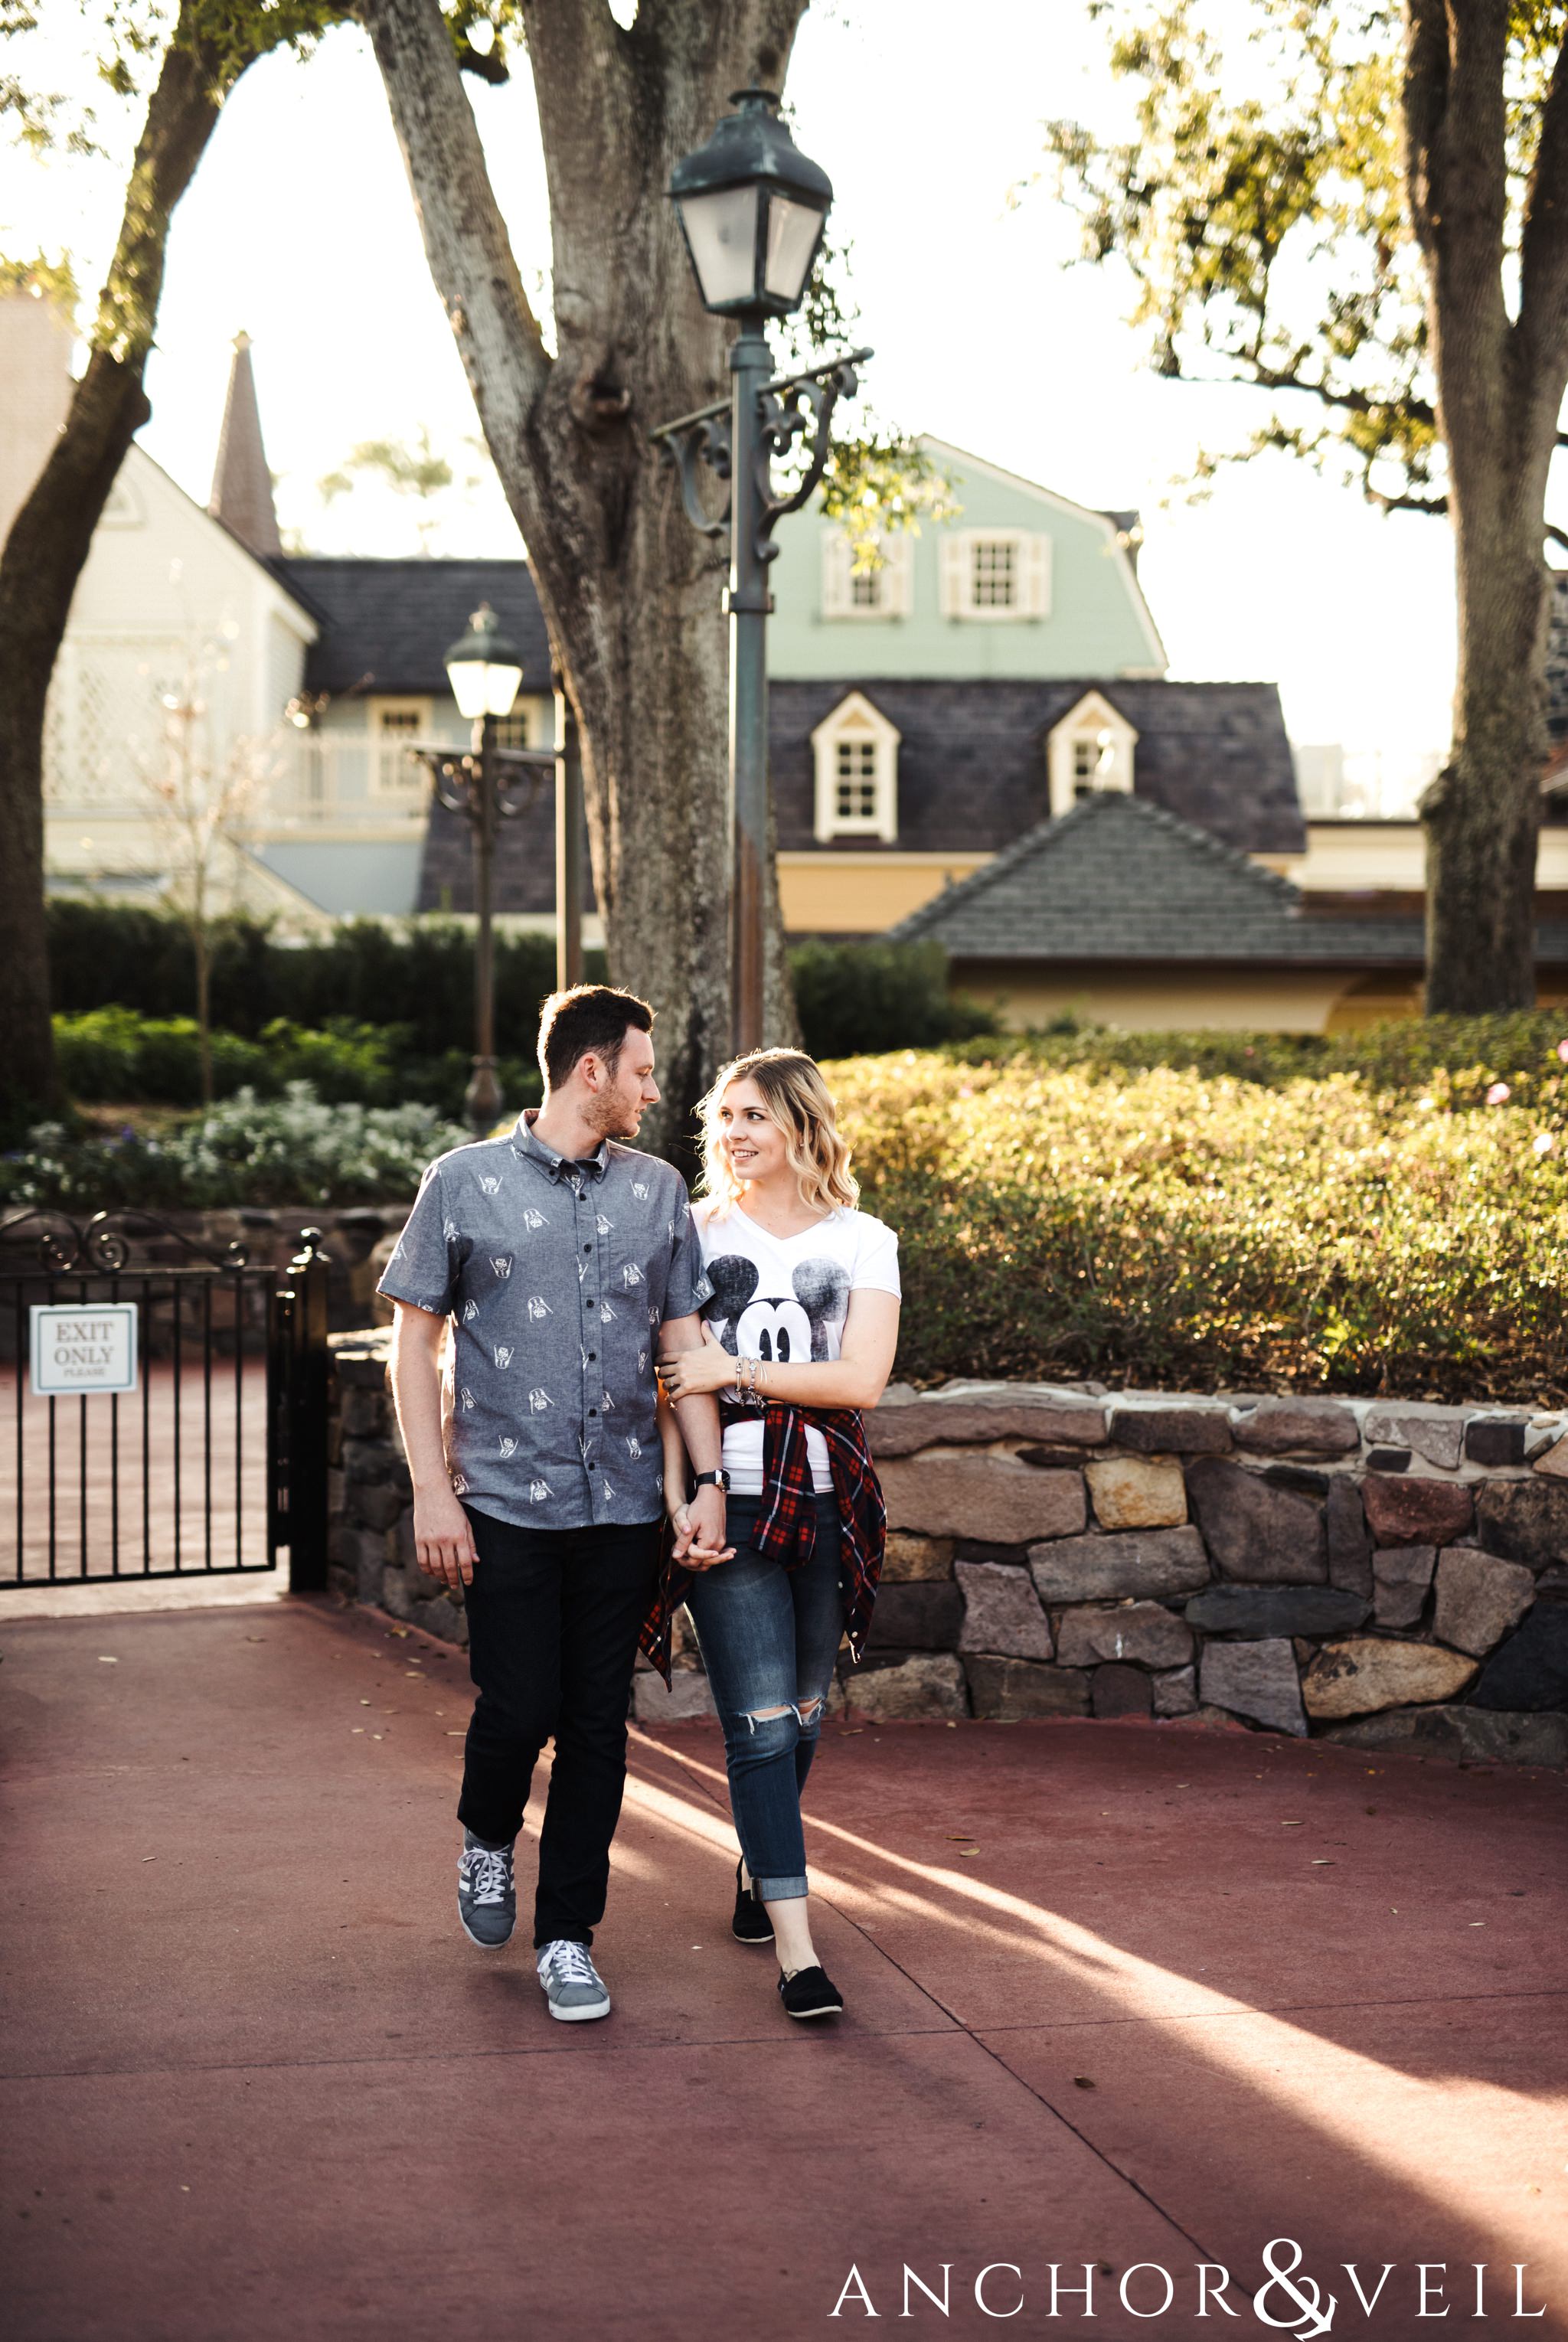 walking hand in hand during their Disney world engagement session at Disney's Magic Kingdom